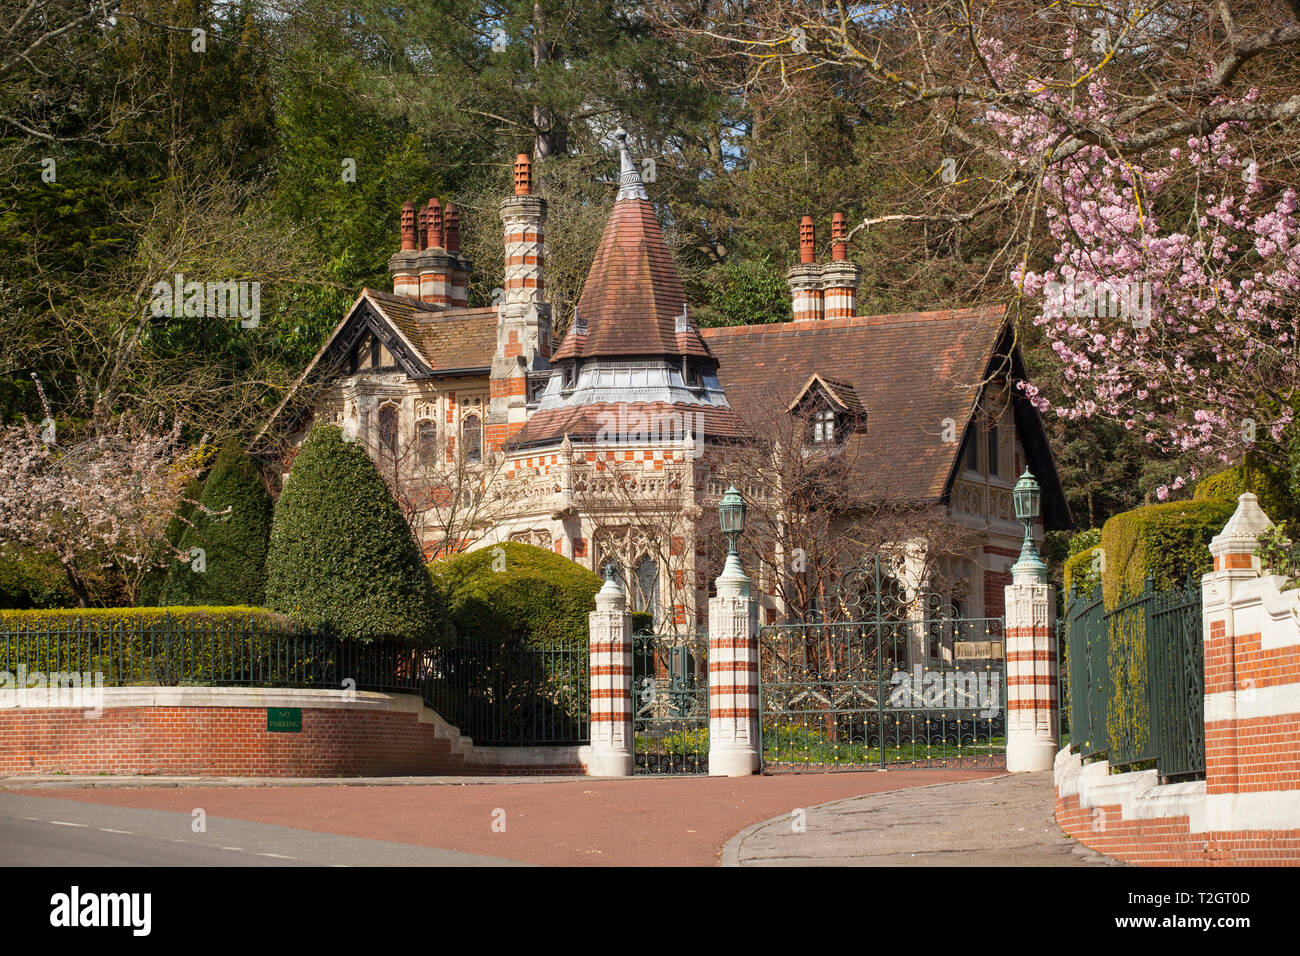 The eccentric and flamboyant neo-Gothic gatehouse of Friar Park mansion, Henley-on-Thames, home to the late George Harrison of The Beatles. Stock Photo